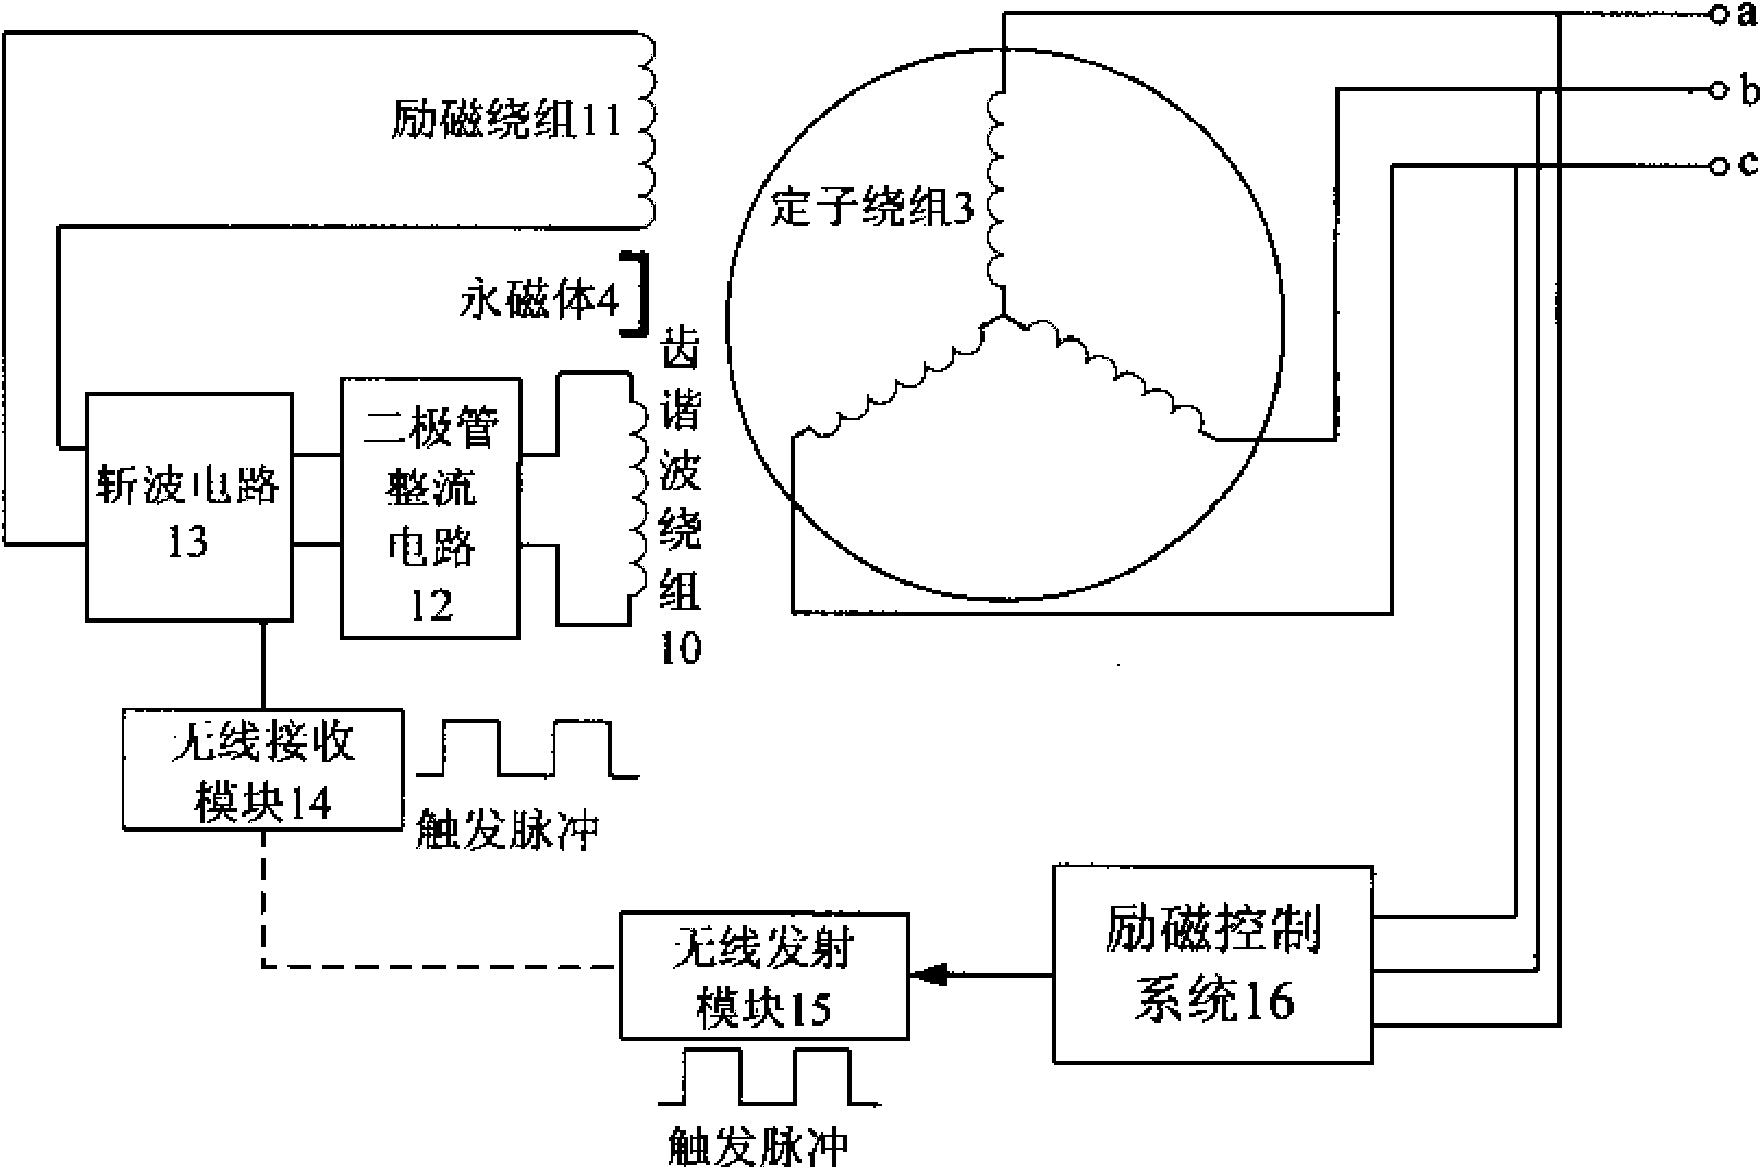 Hybrid excitation permanent magnet motor for wireless transmission and tooth harmonic excitation